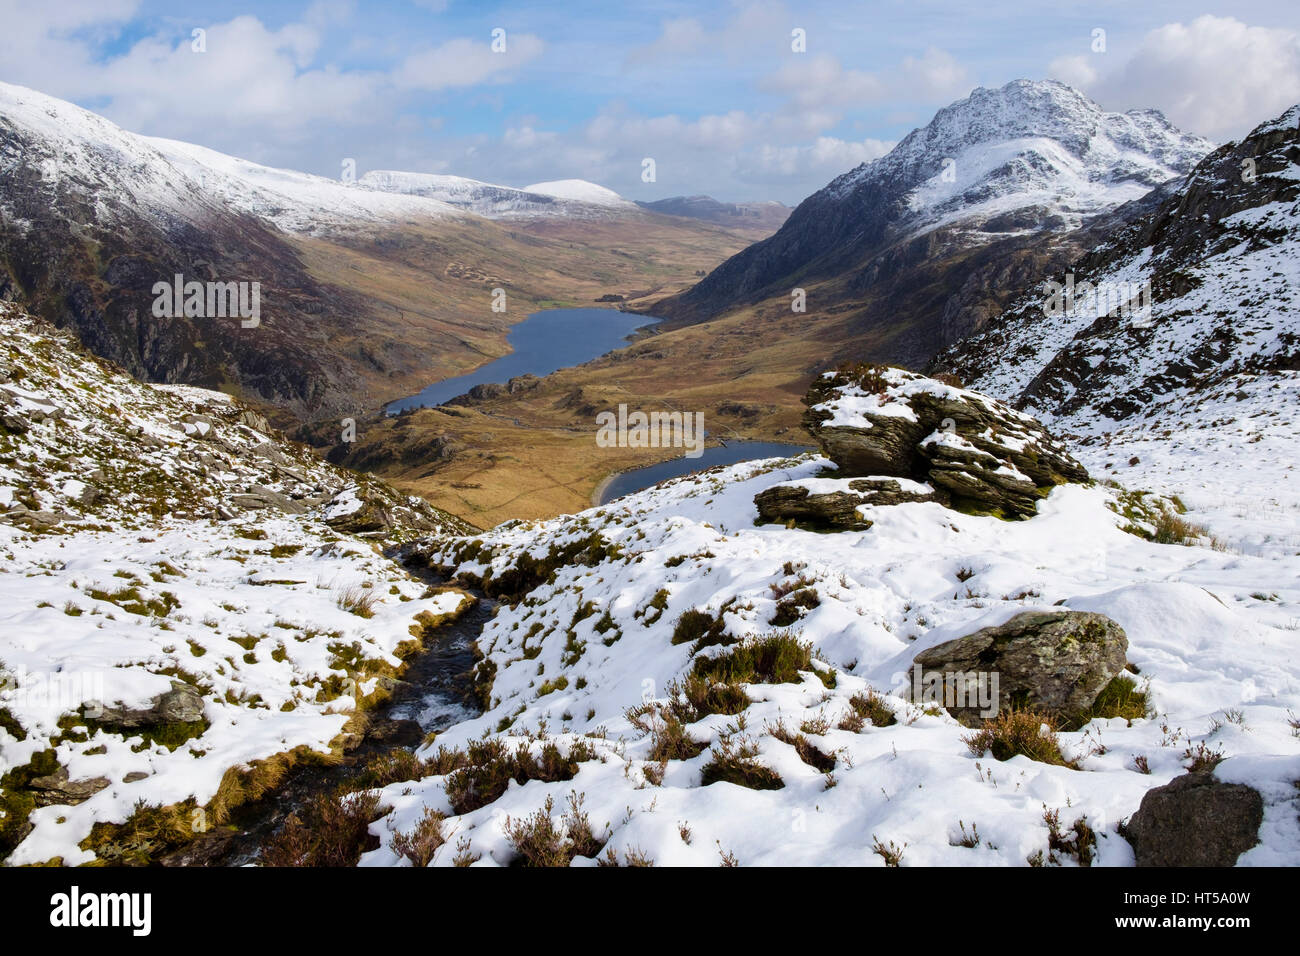 High view to Ogwen Valley and Mount Tryfan from Cwm Clyd on Y Garn with snow in Snowdonia National Park mountains. Ogwen, Gwynedd, North Wales, UK Stock Photo